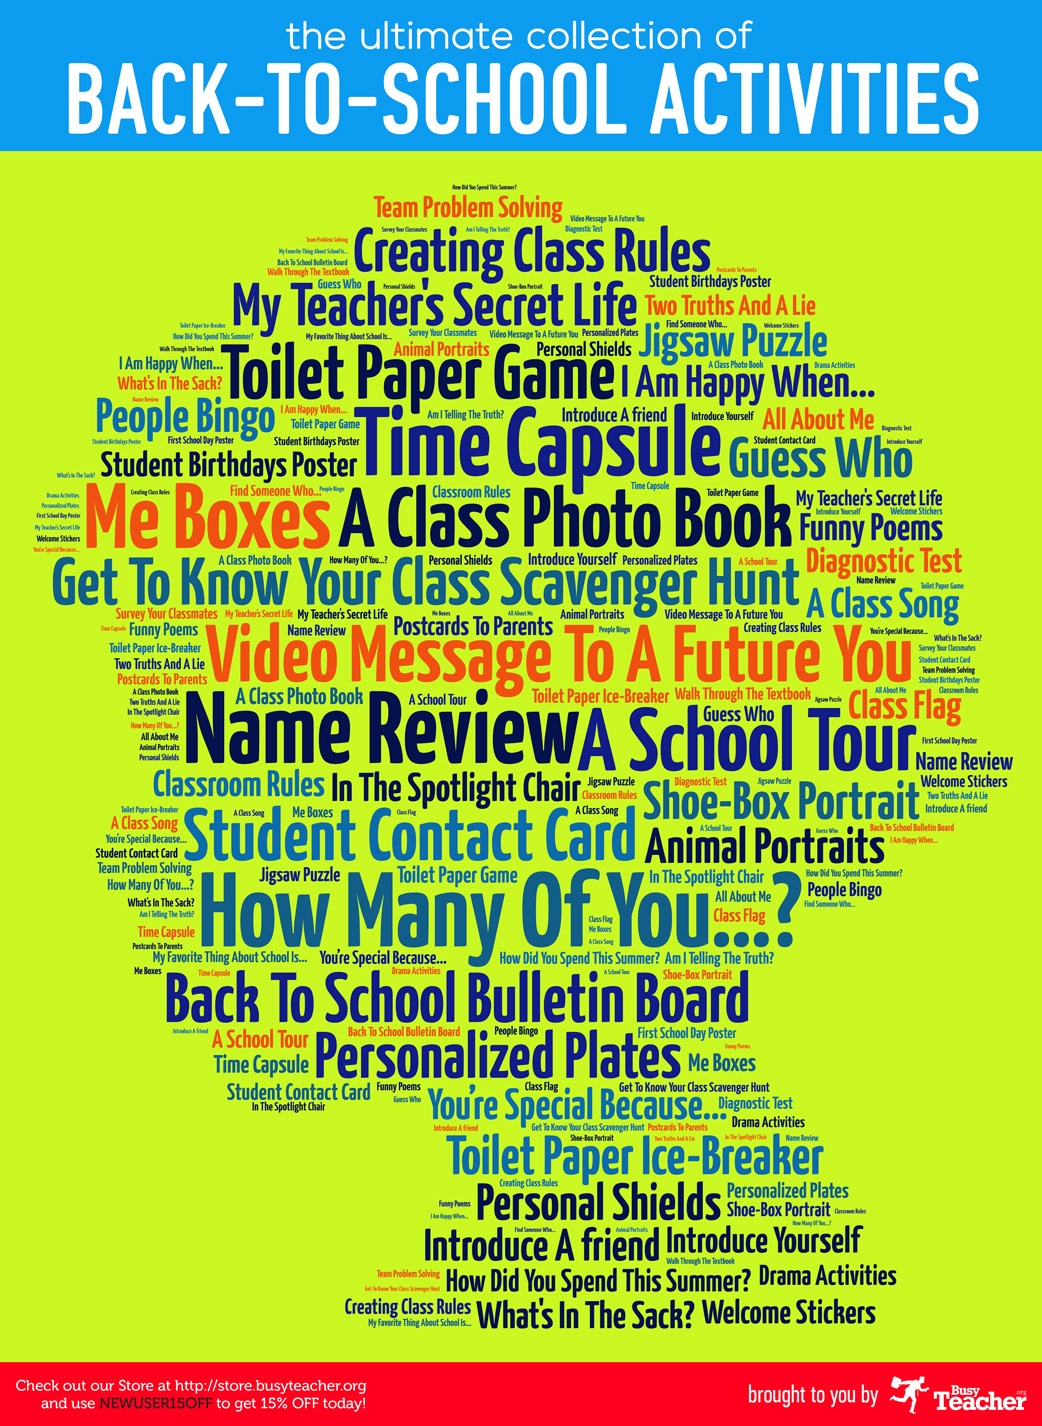 66 Free Classroom Posters - Free Printable Posters For Teachers